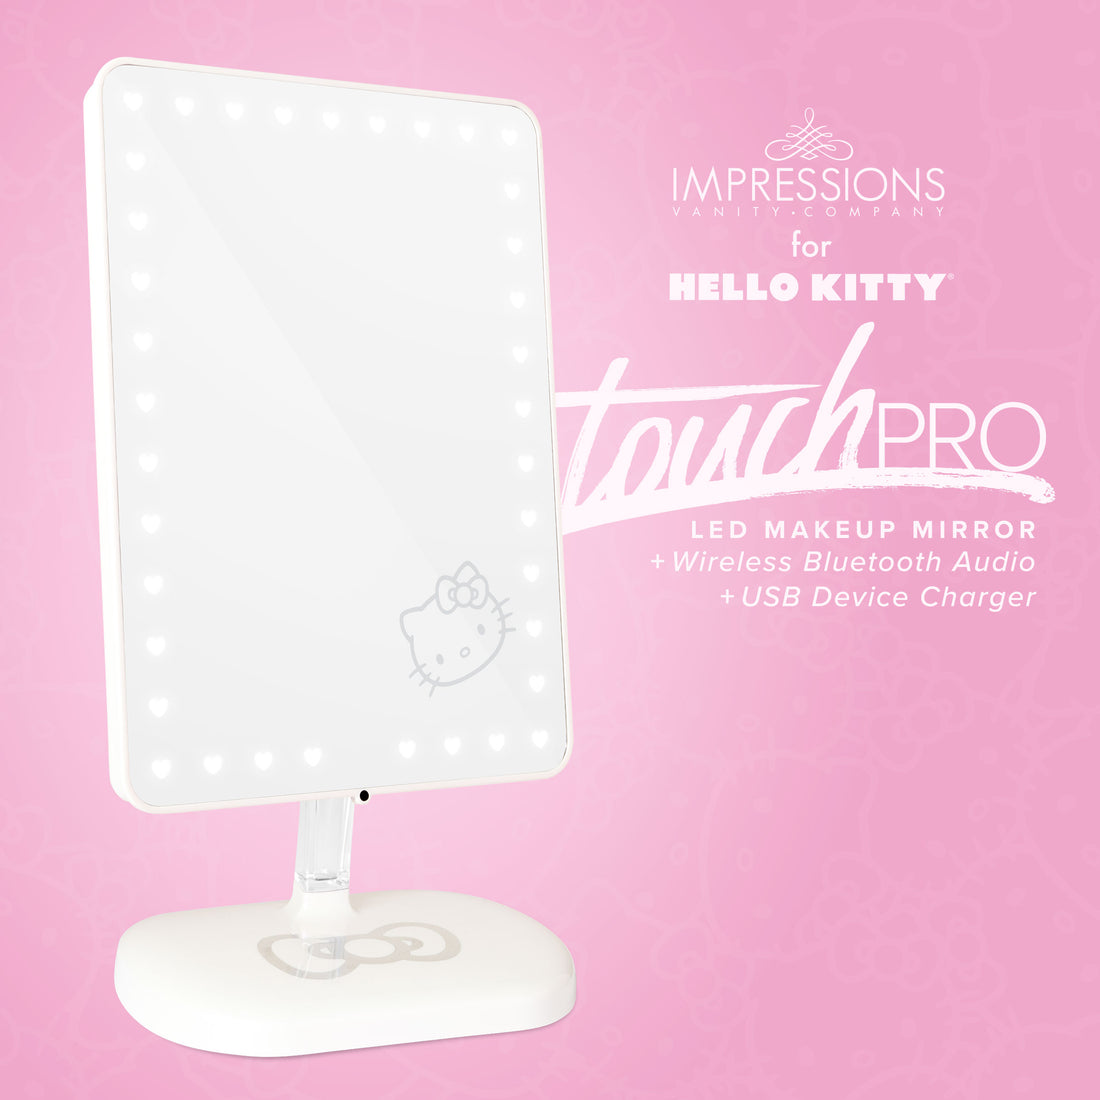 Impressions Touch Pro Hello Kitty Edition LED Makeup Mirror with Bluetooth Audio+Speakerphone & USB Charger